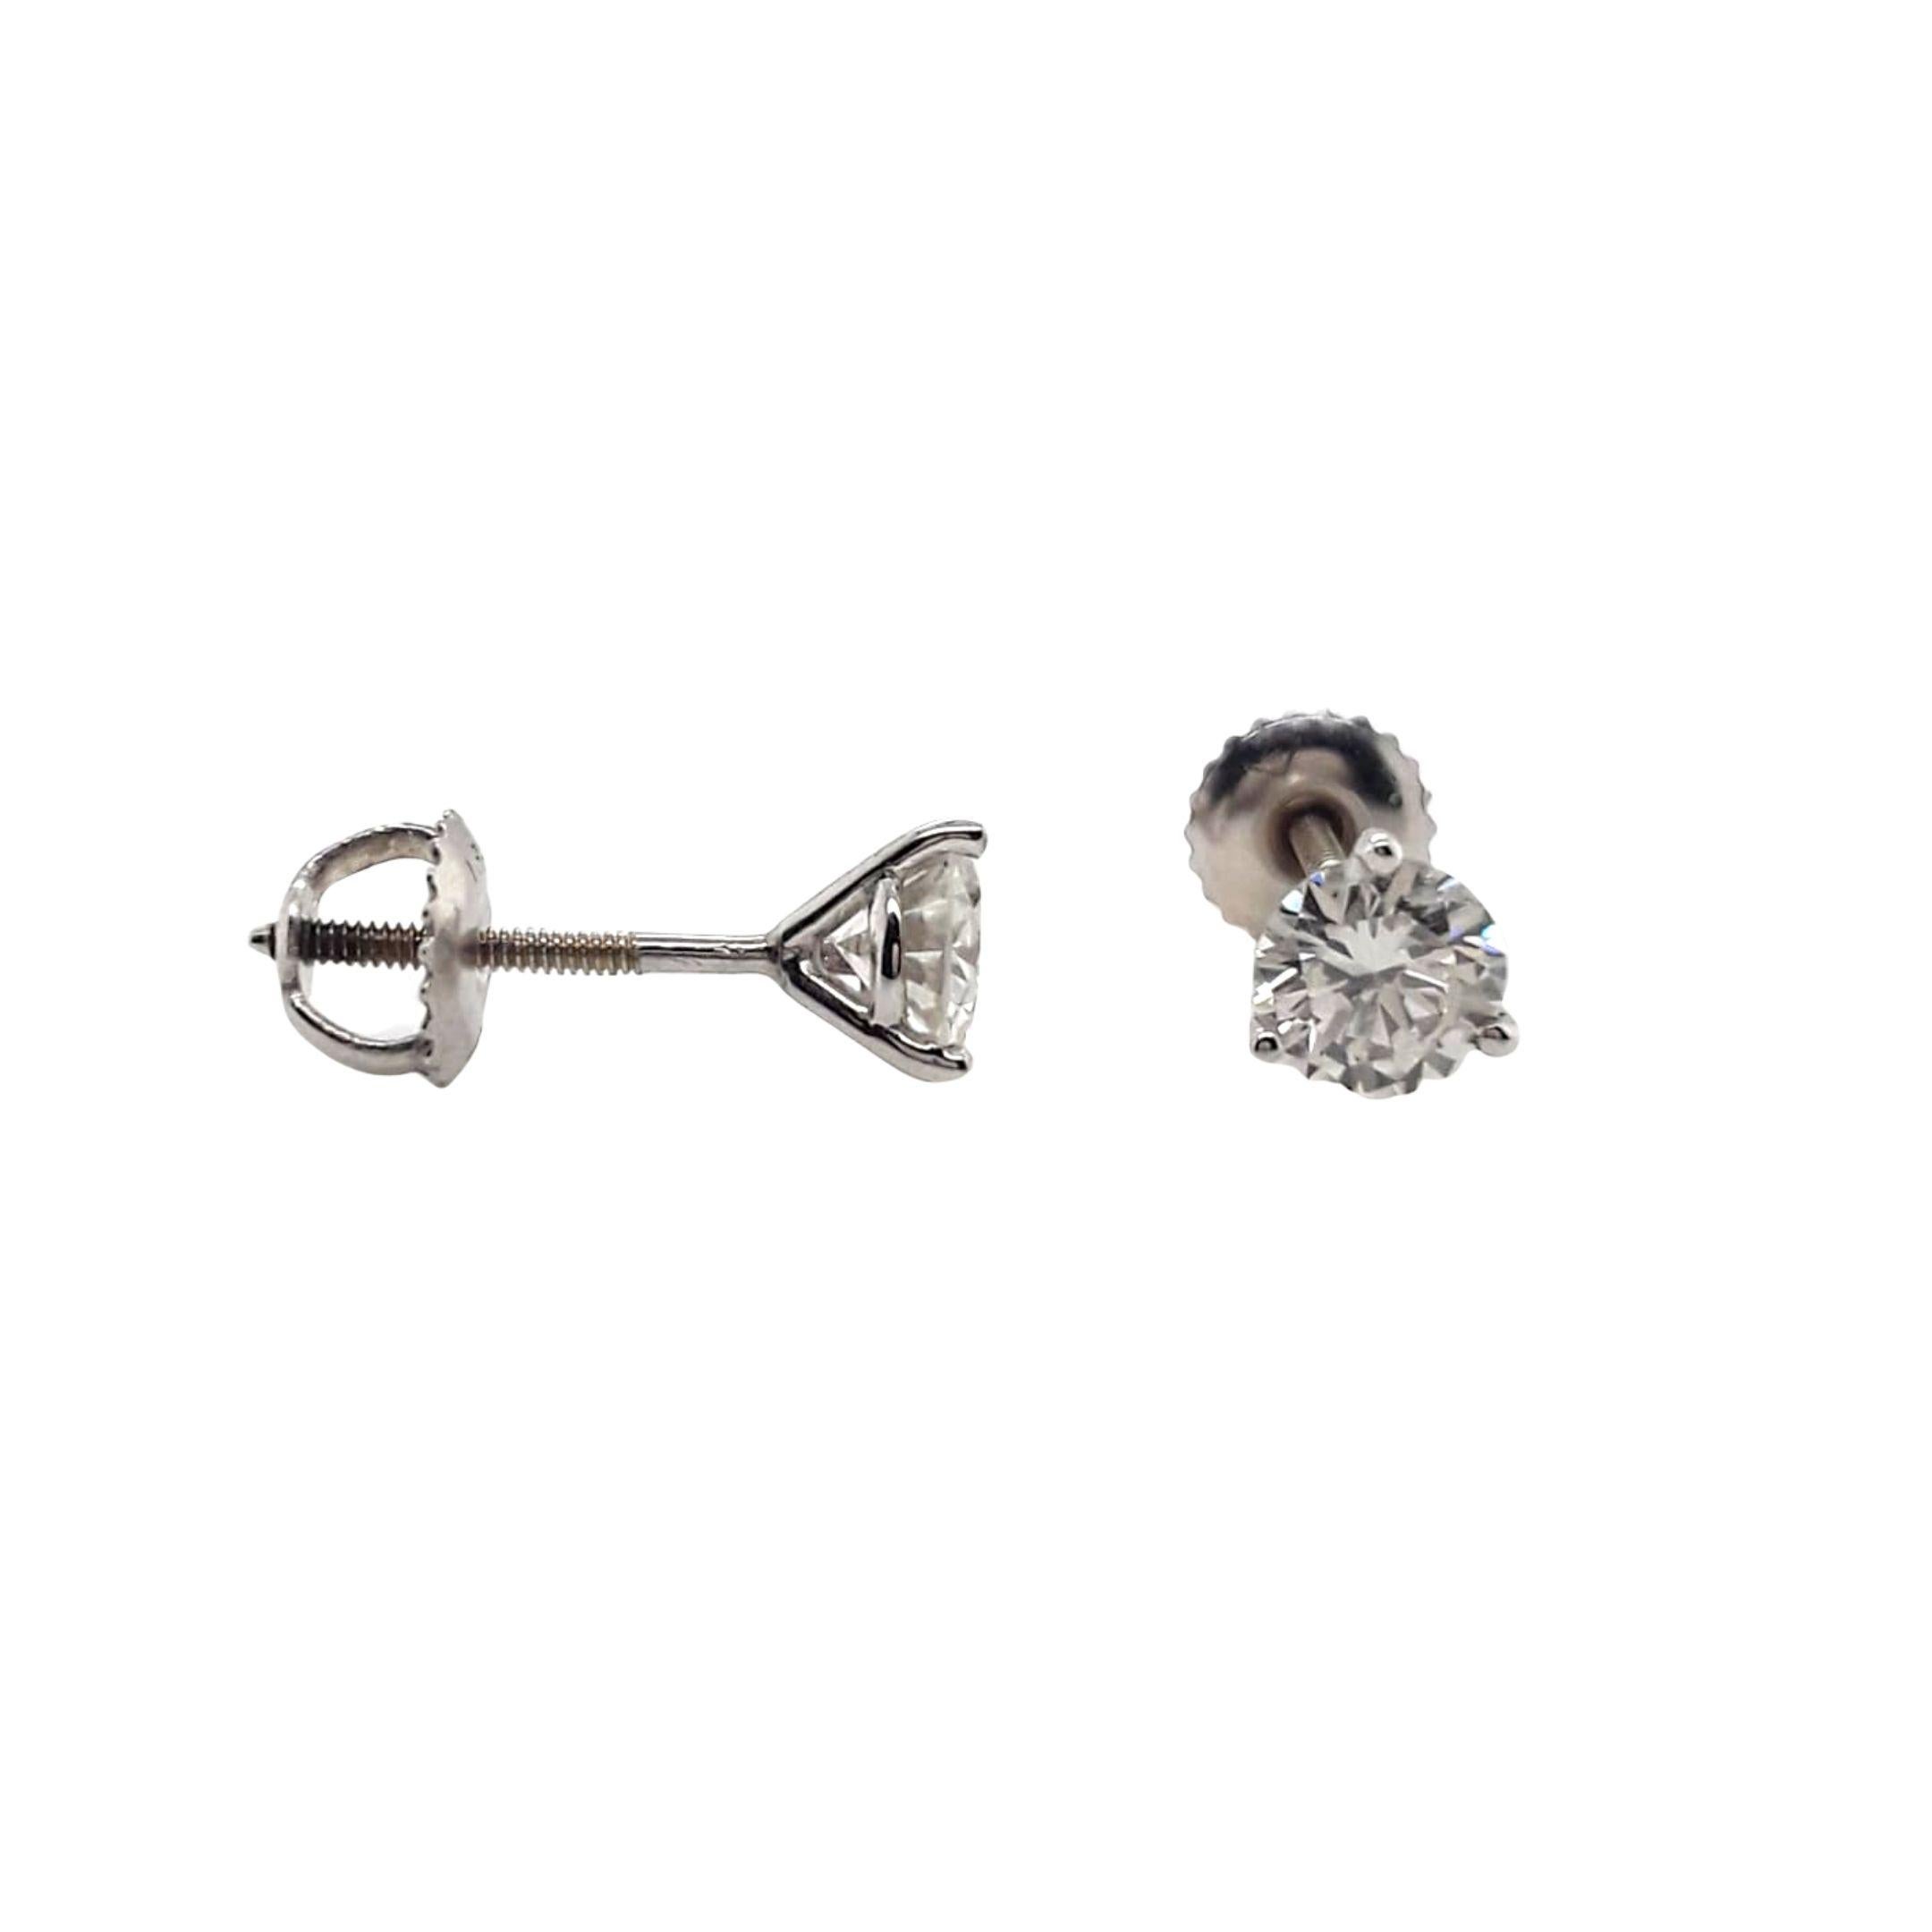 Diamond Stud Earrings made with natural brilliant cut diamonds. Total Weight: 1.03 carats, Stone Diameter: 5.22 x 5.30. Set on a 3 prong mounting in 18 karat white gold, screw back setting. 